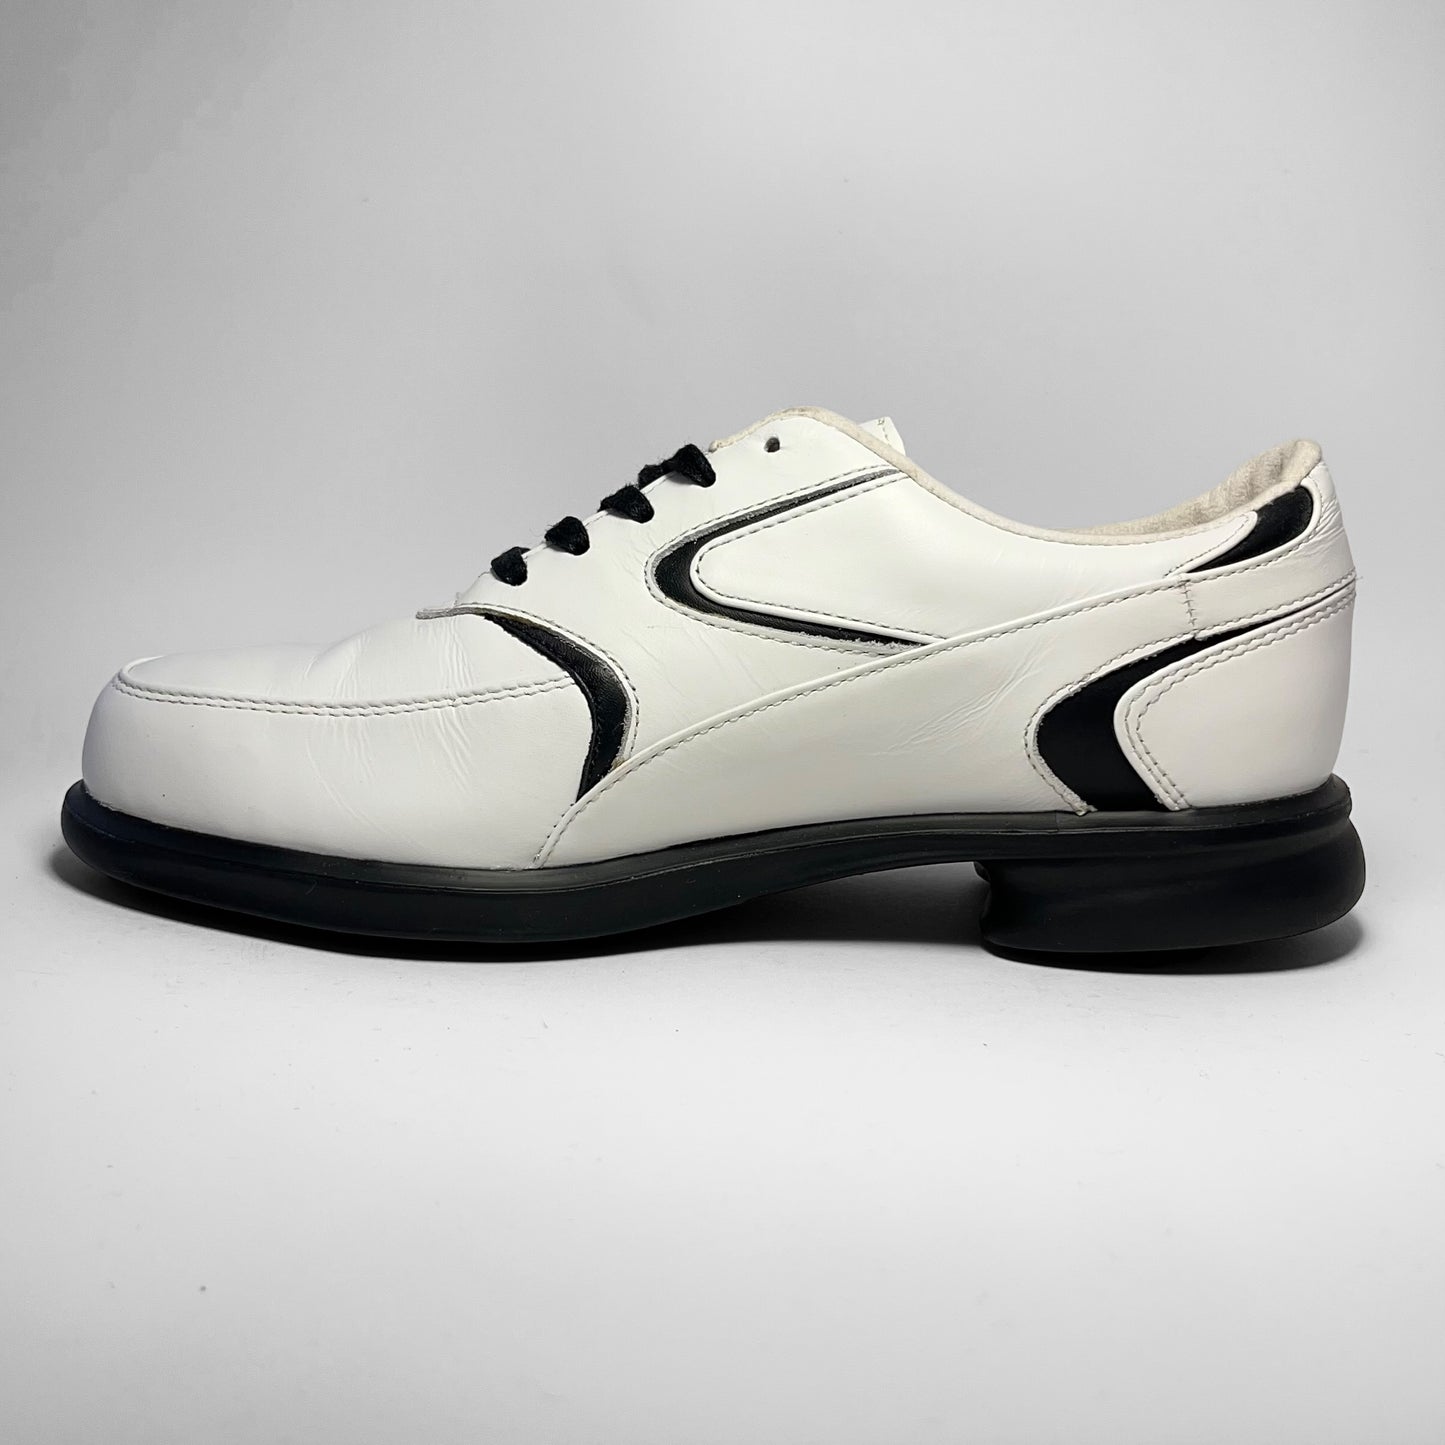 Oakley Golfshoes Leather (2000s)